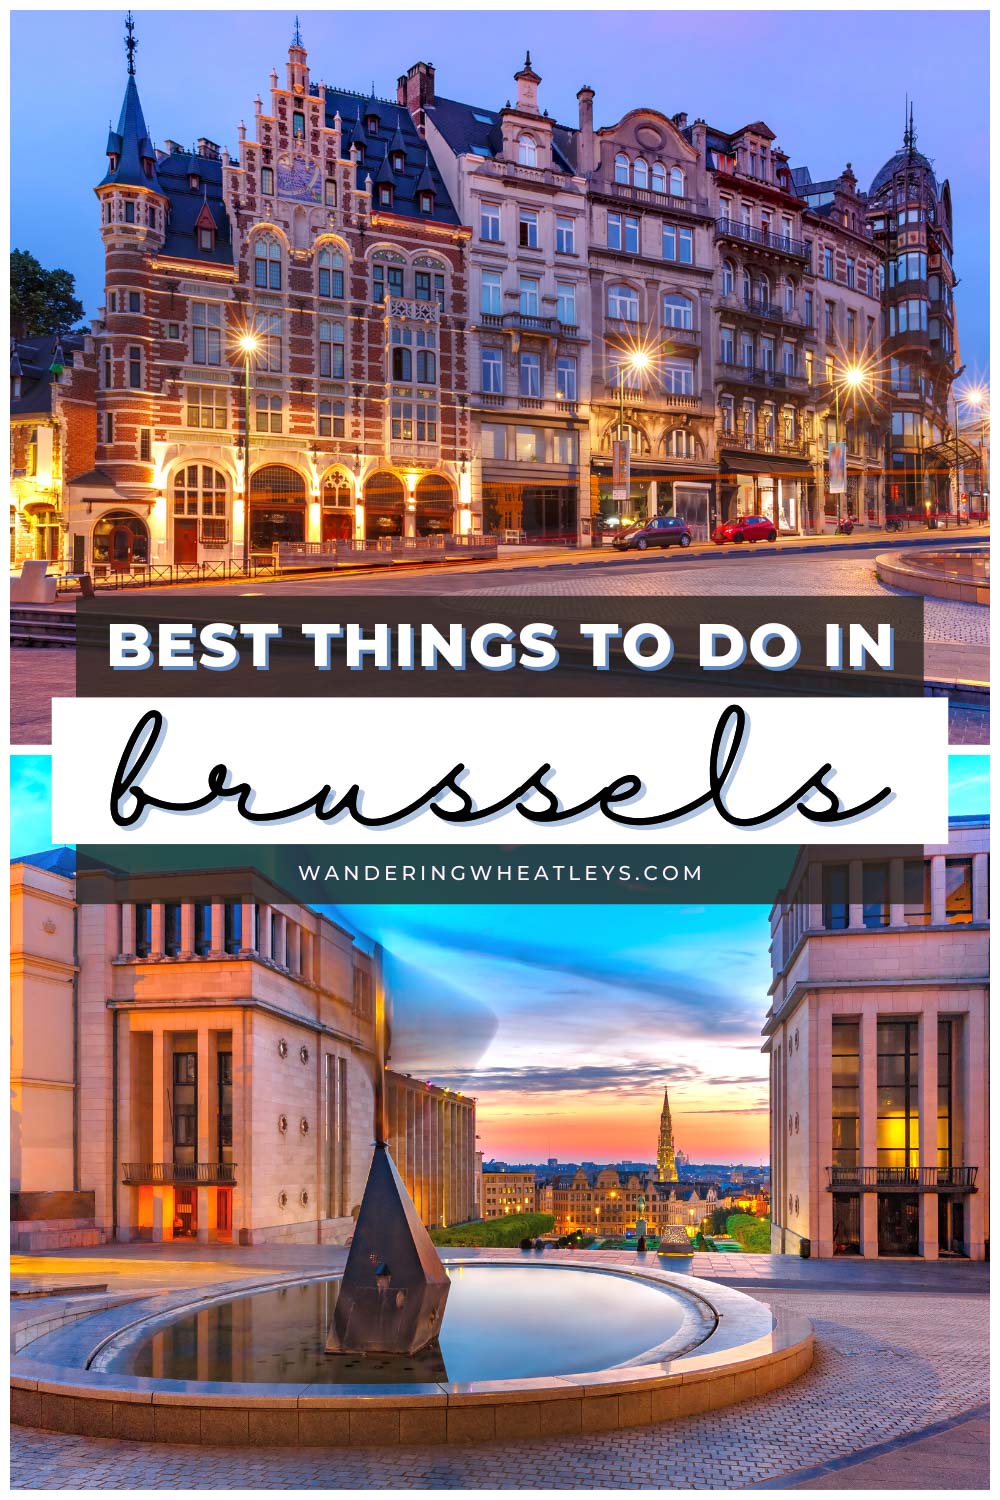 Best Things to do in Brussels